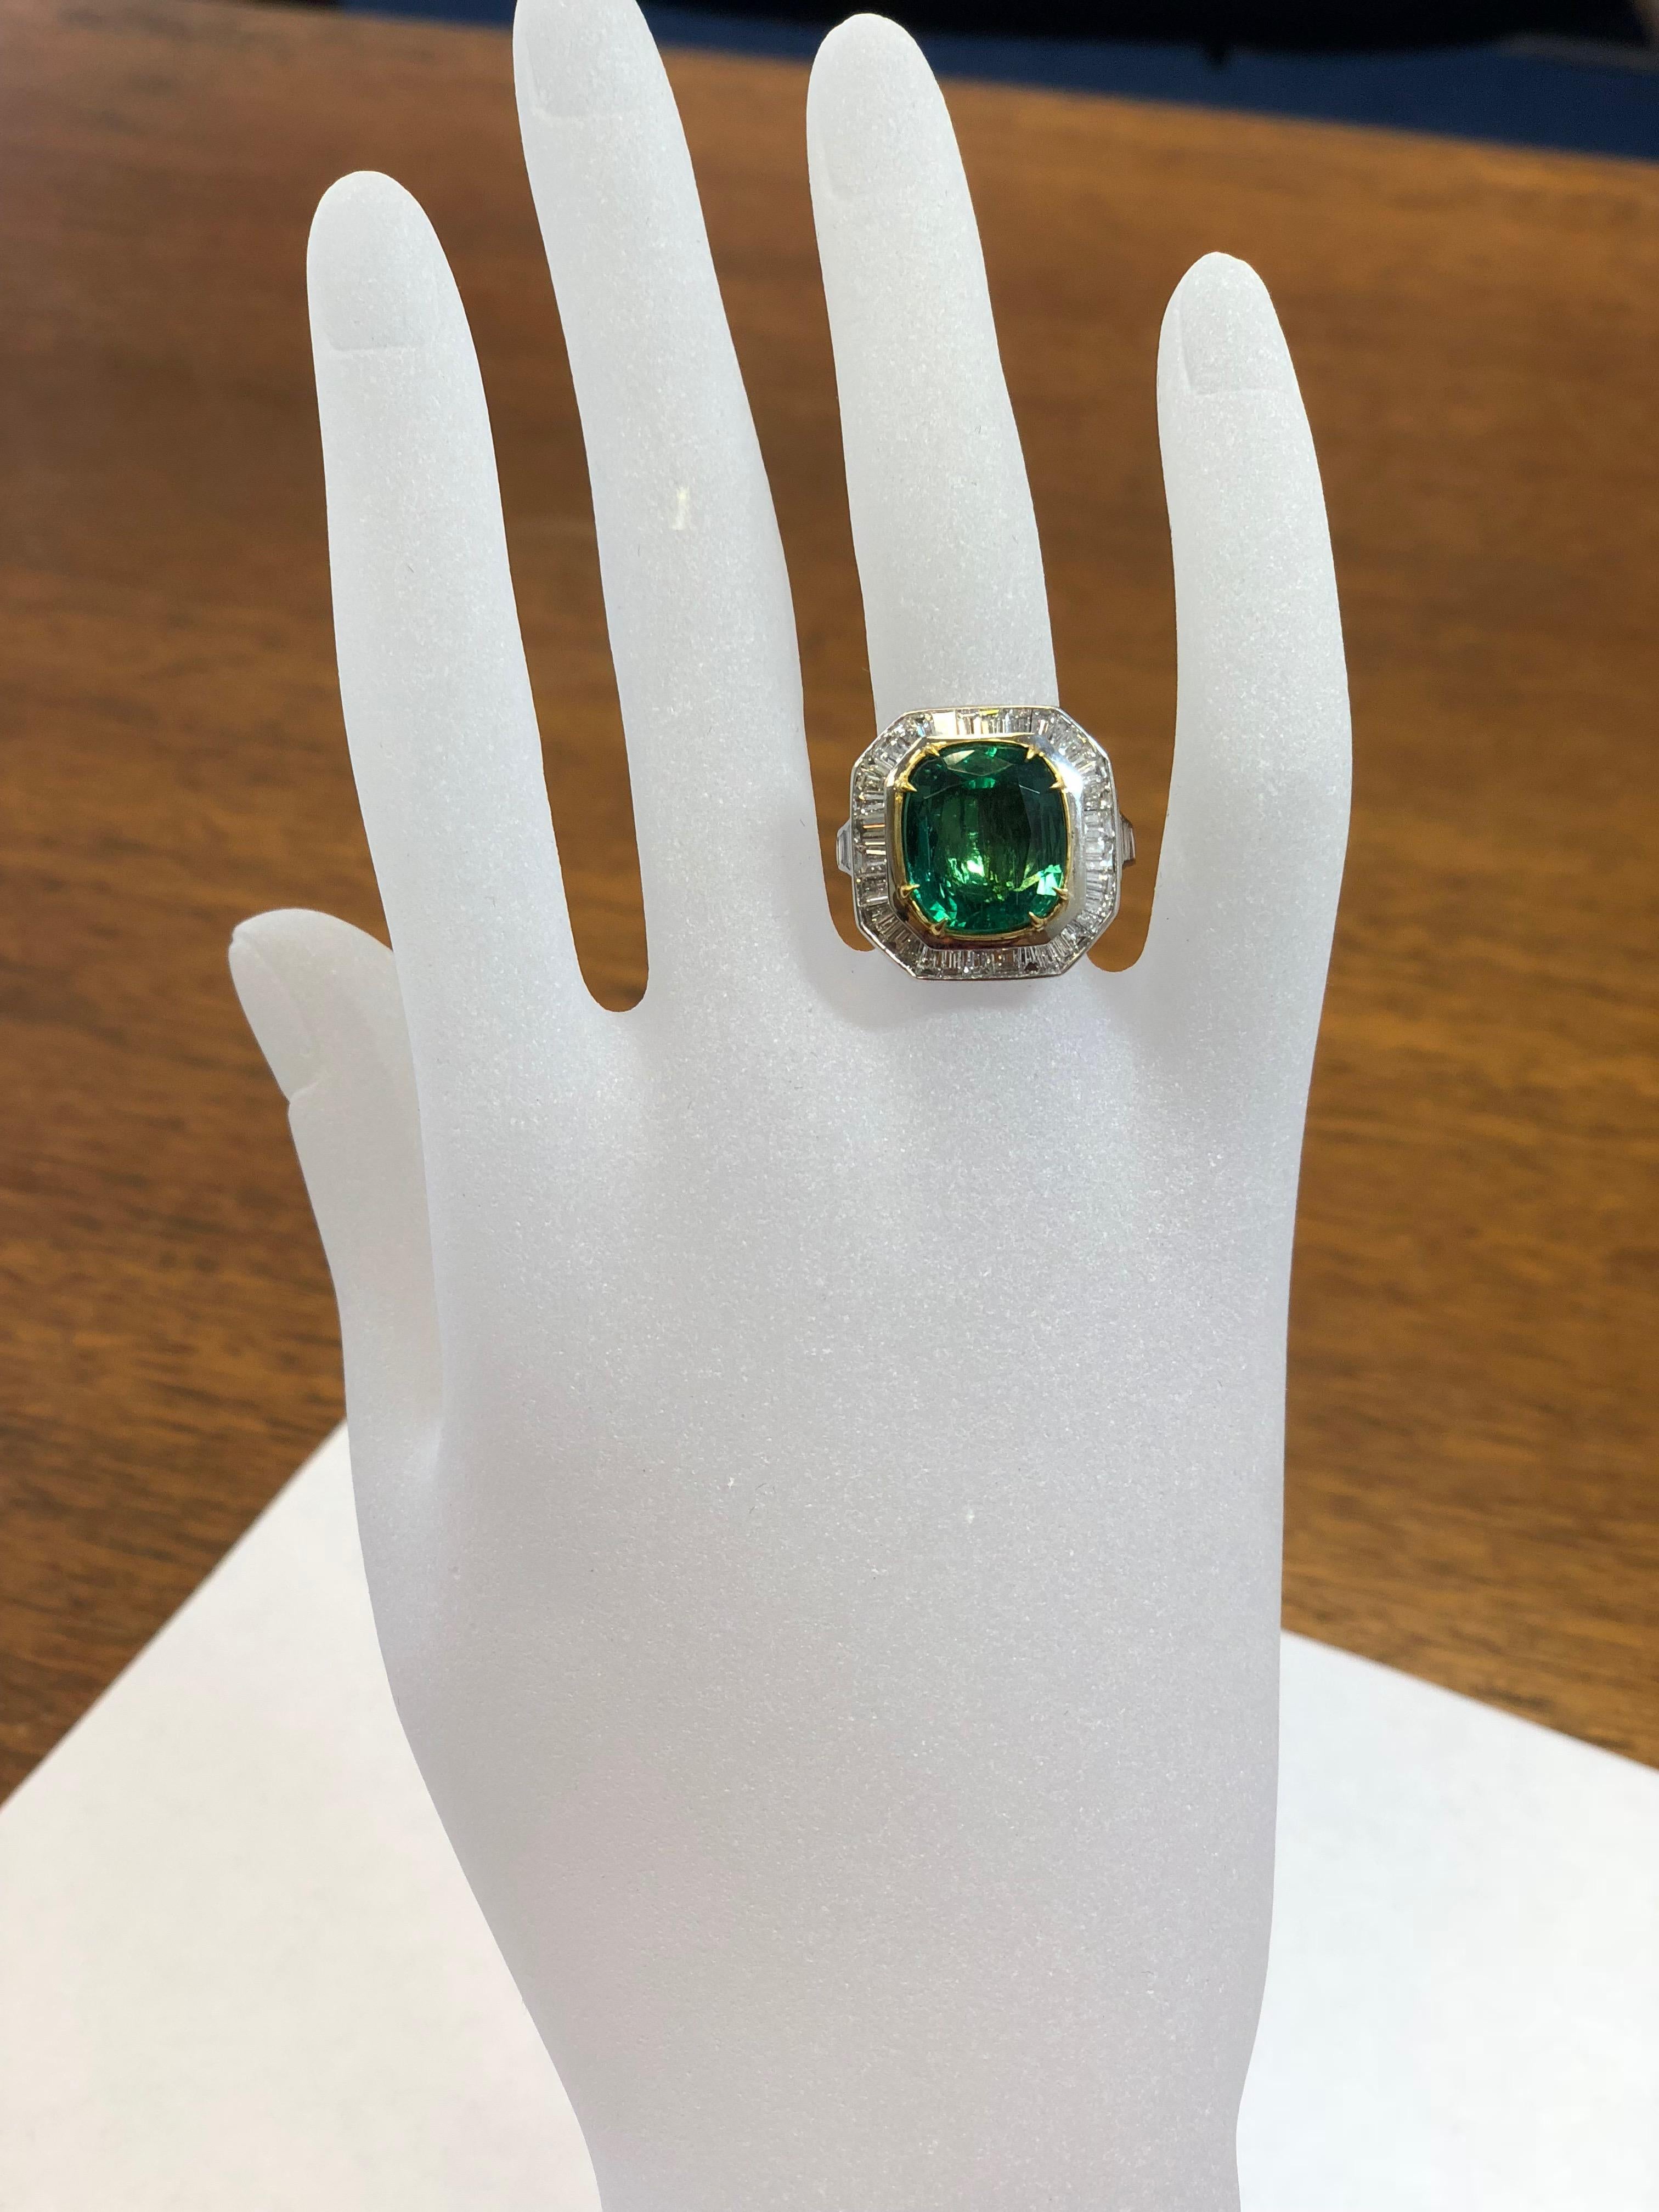 Stunning 6.98 carat Zambian emerald cushion cut with beautiful diamond baguettes surrounding the stone and on the band.  Gorgeous deep green color and luster to the emerald with good quality white diamonds.  The shape of the cushion is ideal for